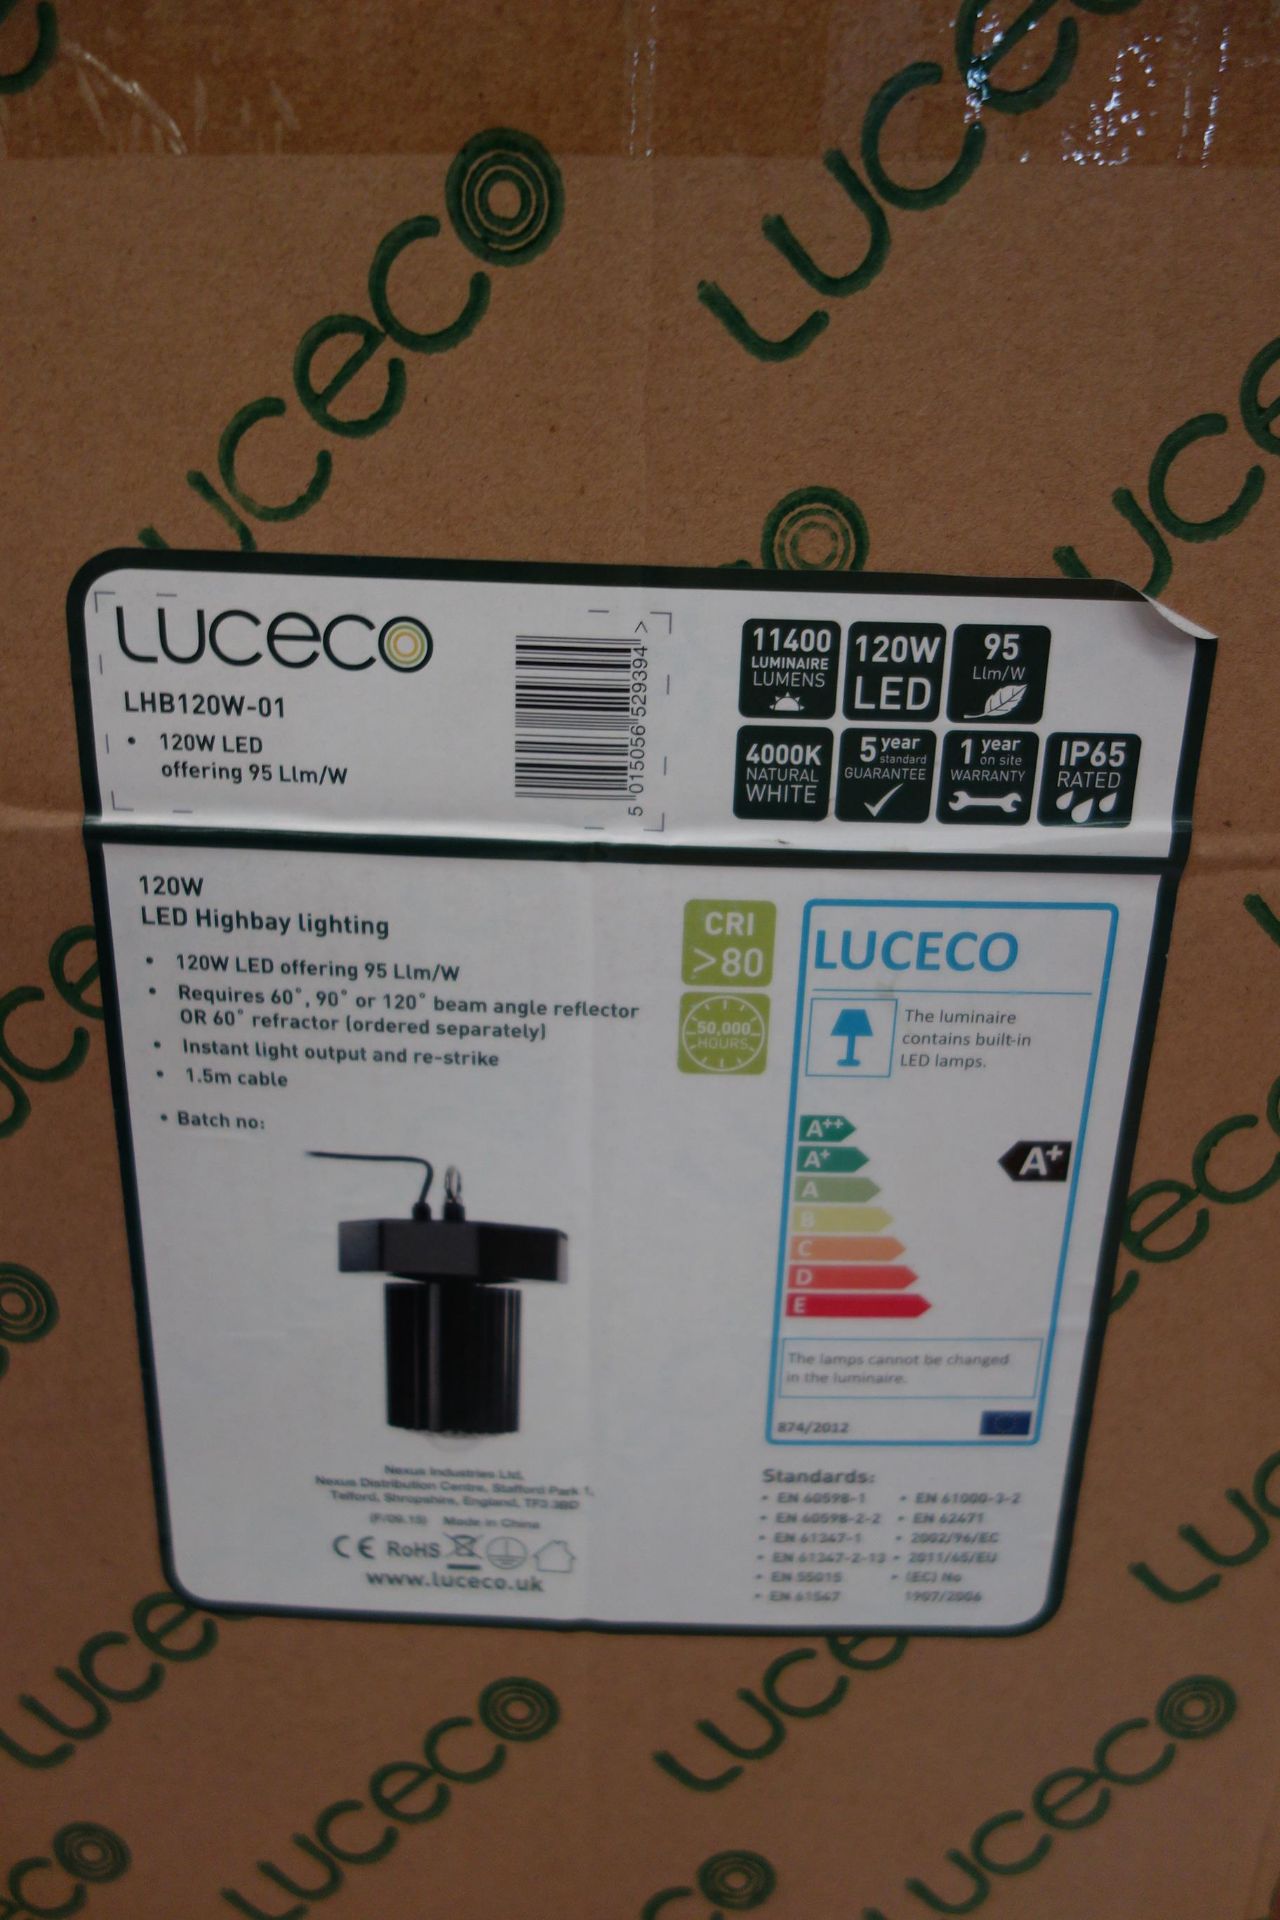 4 X Luceo LHB120W-01 120W LED High Bay 11400 Lumens With Reflexter